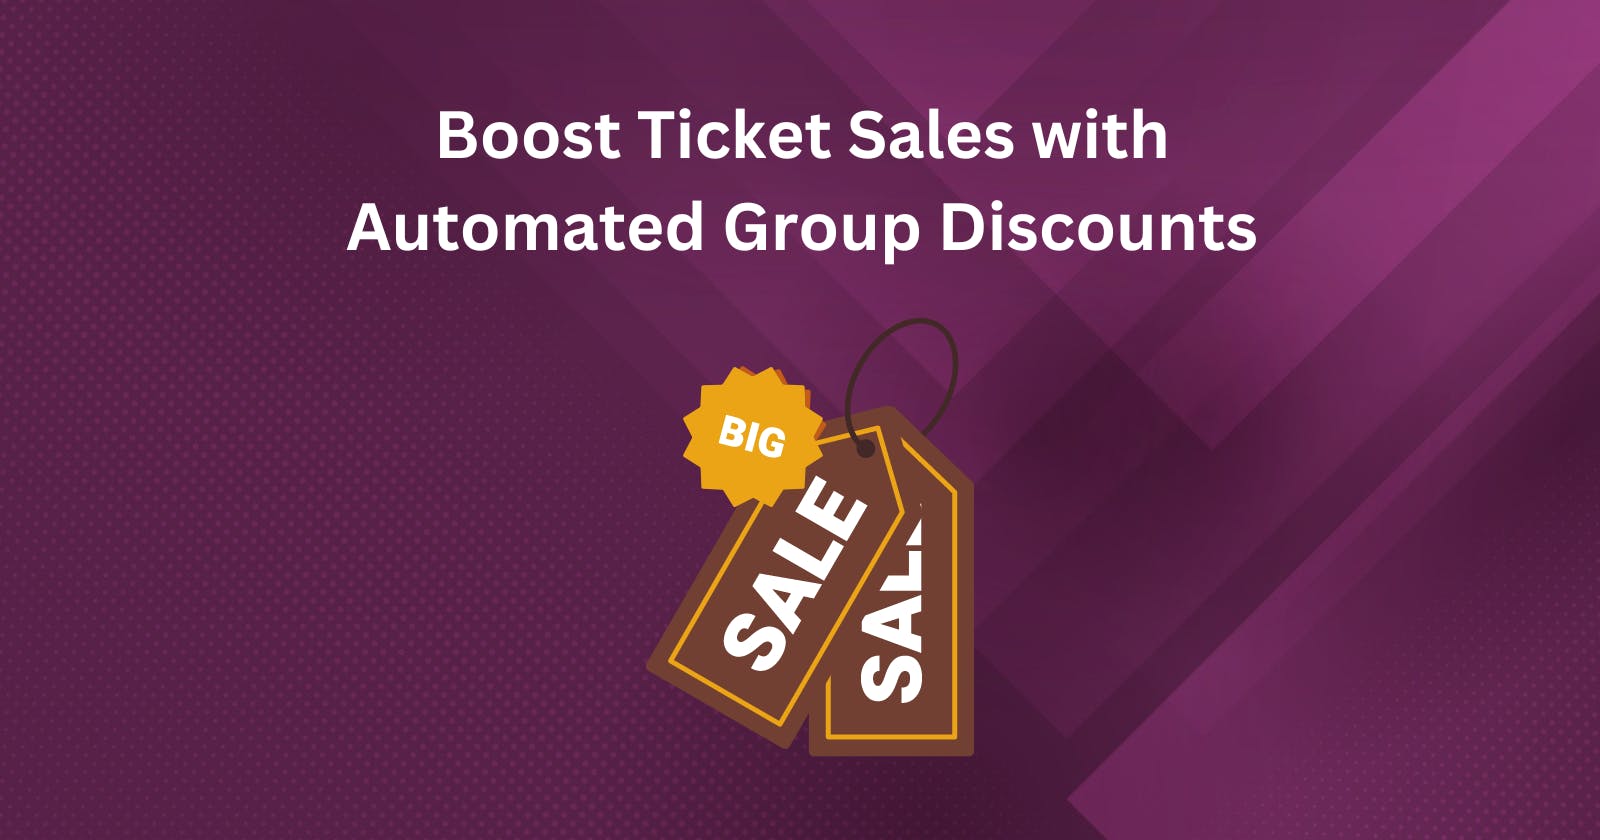 Boost Ticket Sales with Automated Group Discounts on KonfHub